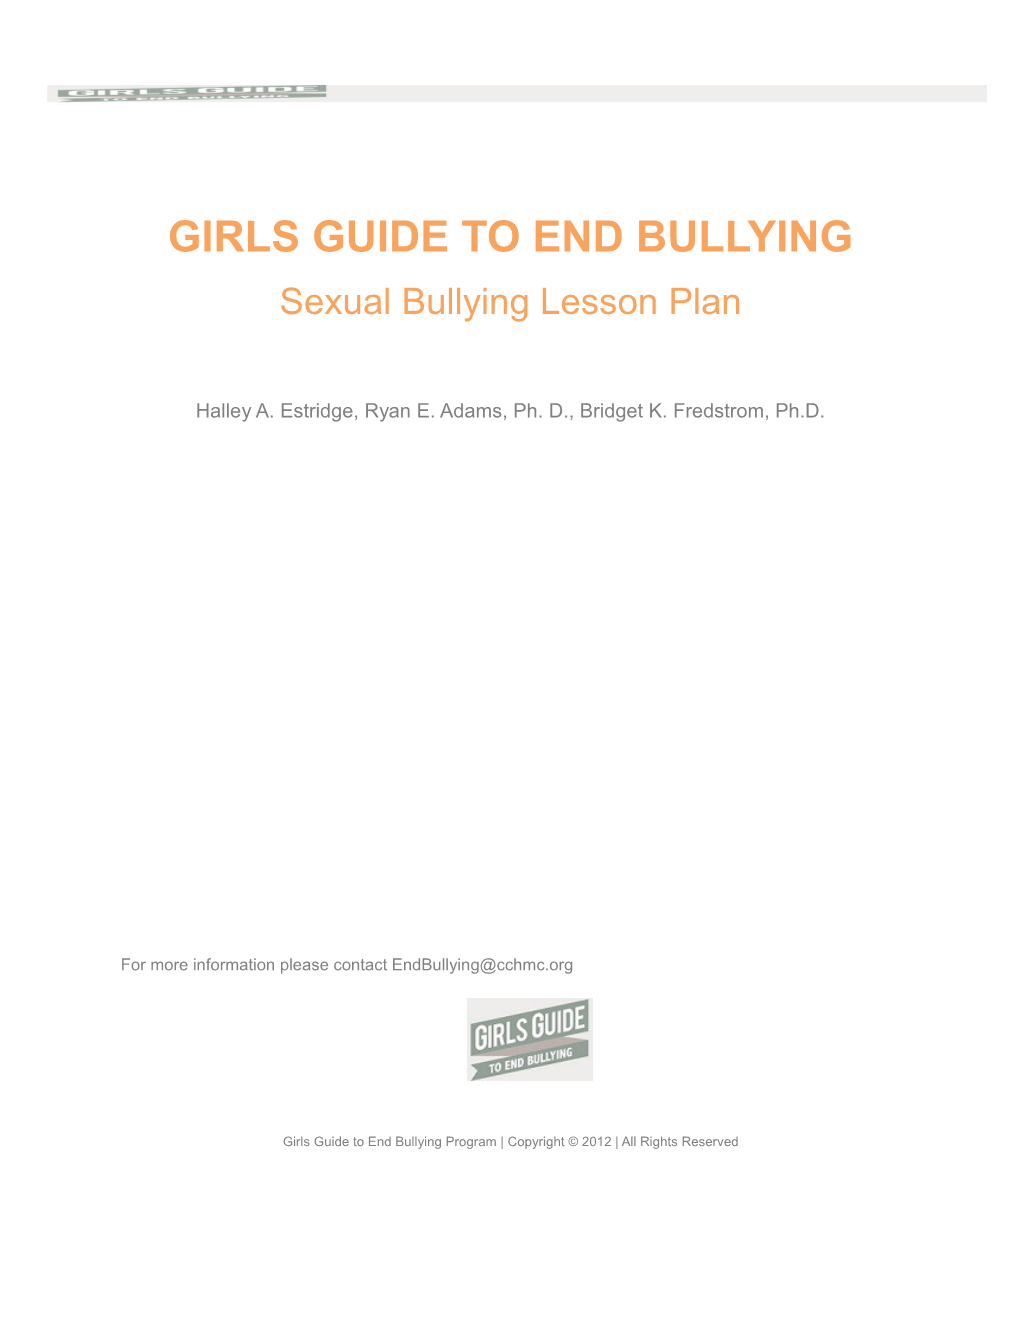 Girls Guide to End Bullying